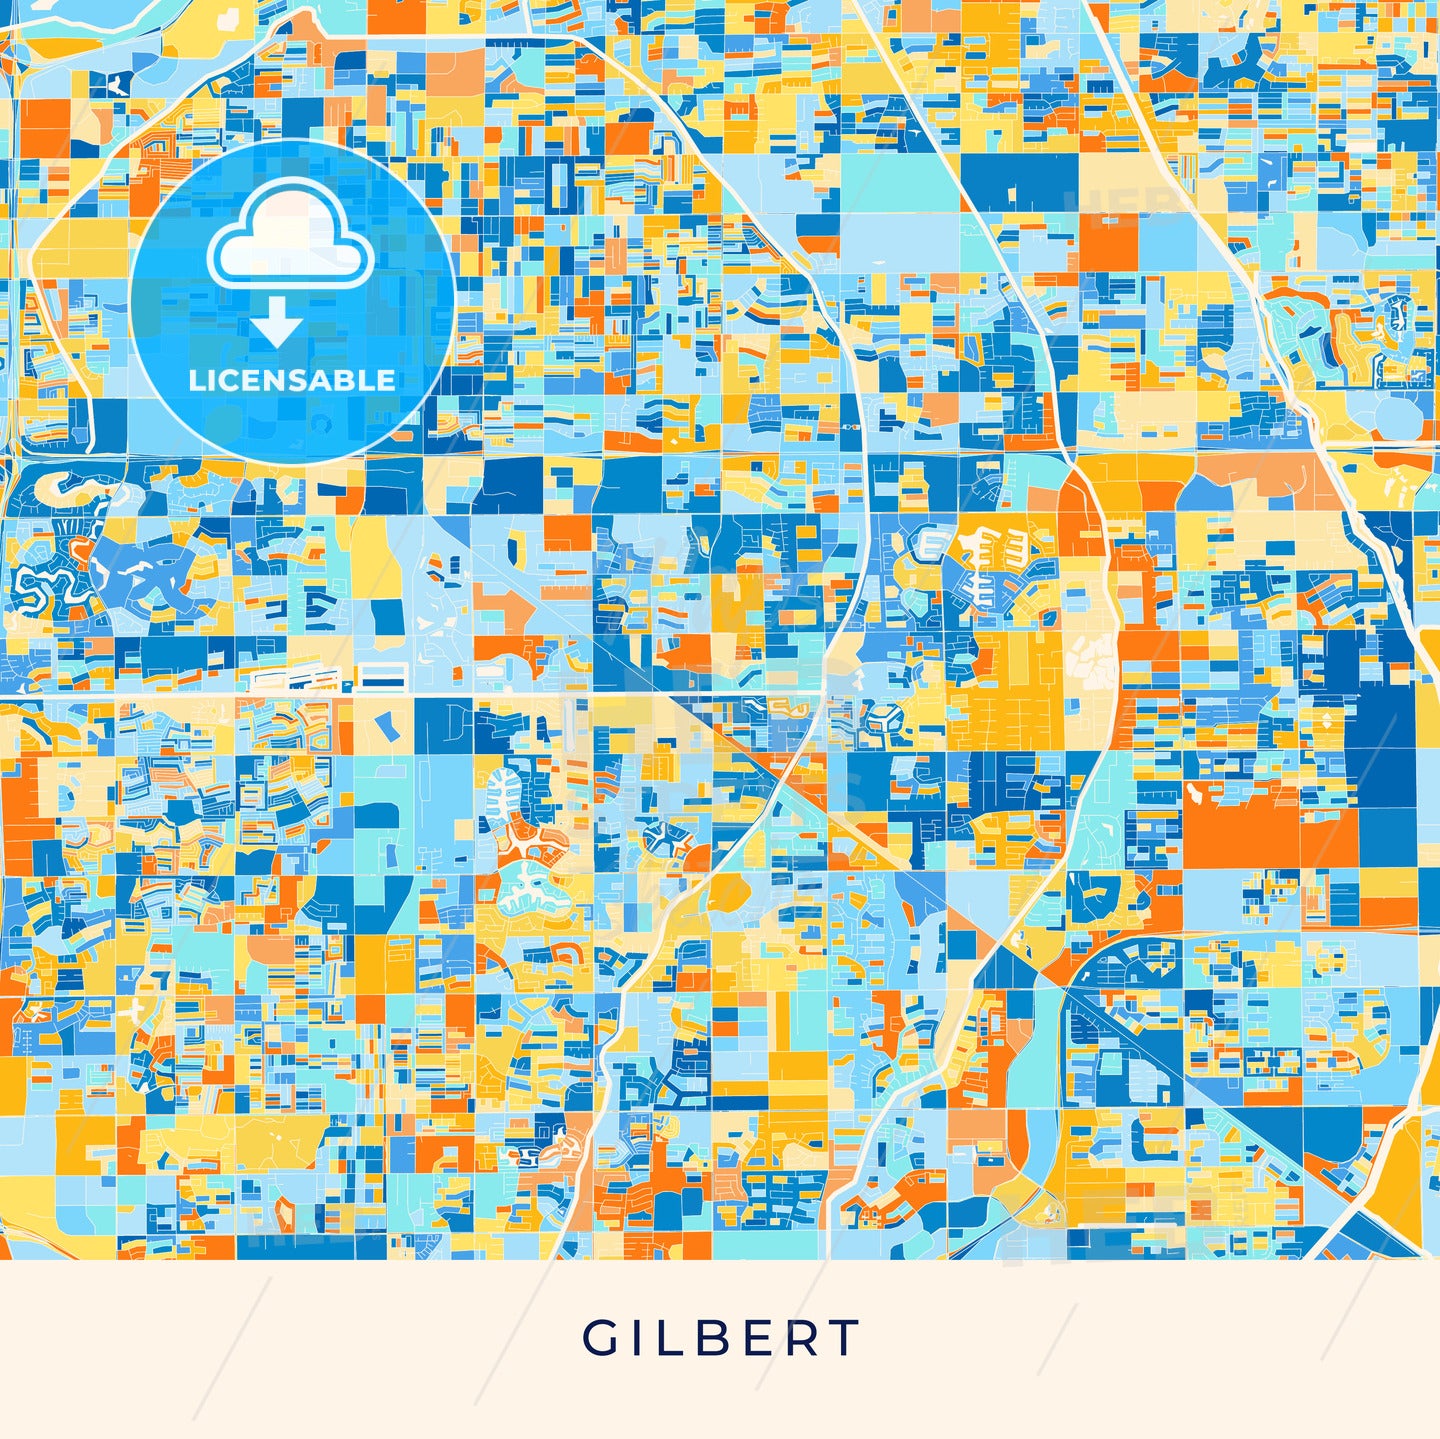 Gilbert colorful map poster template